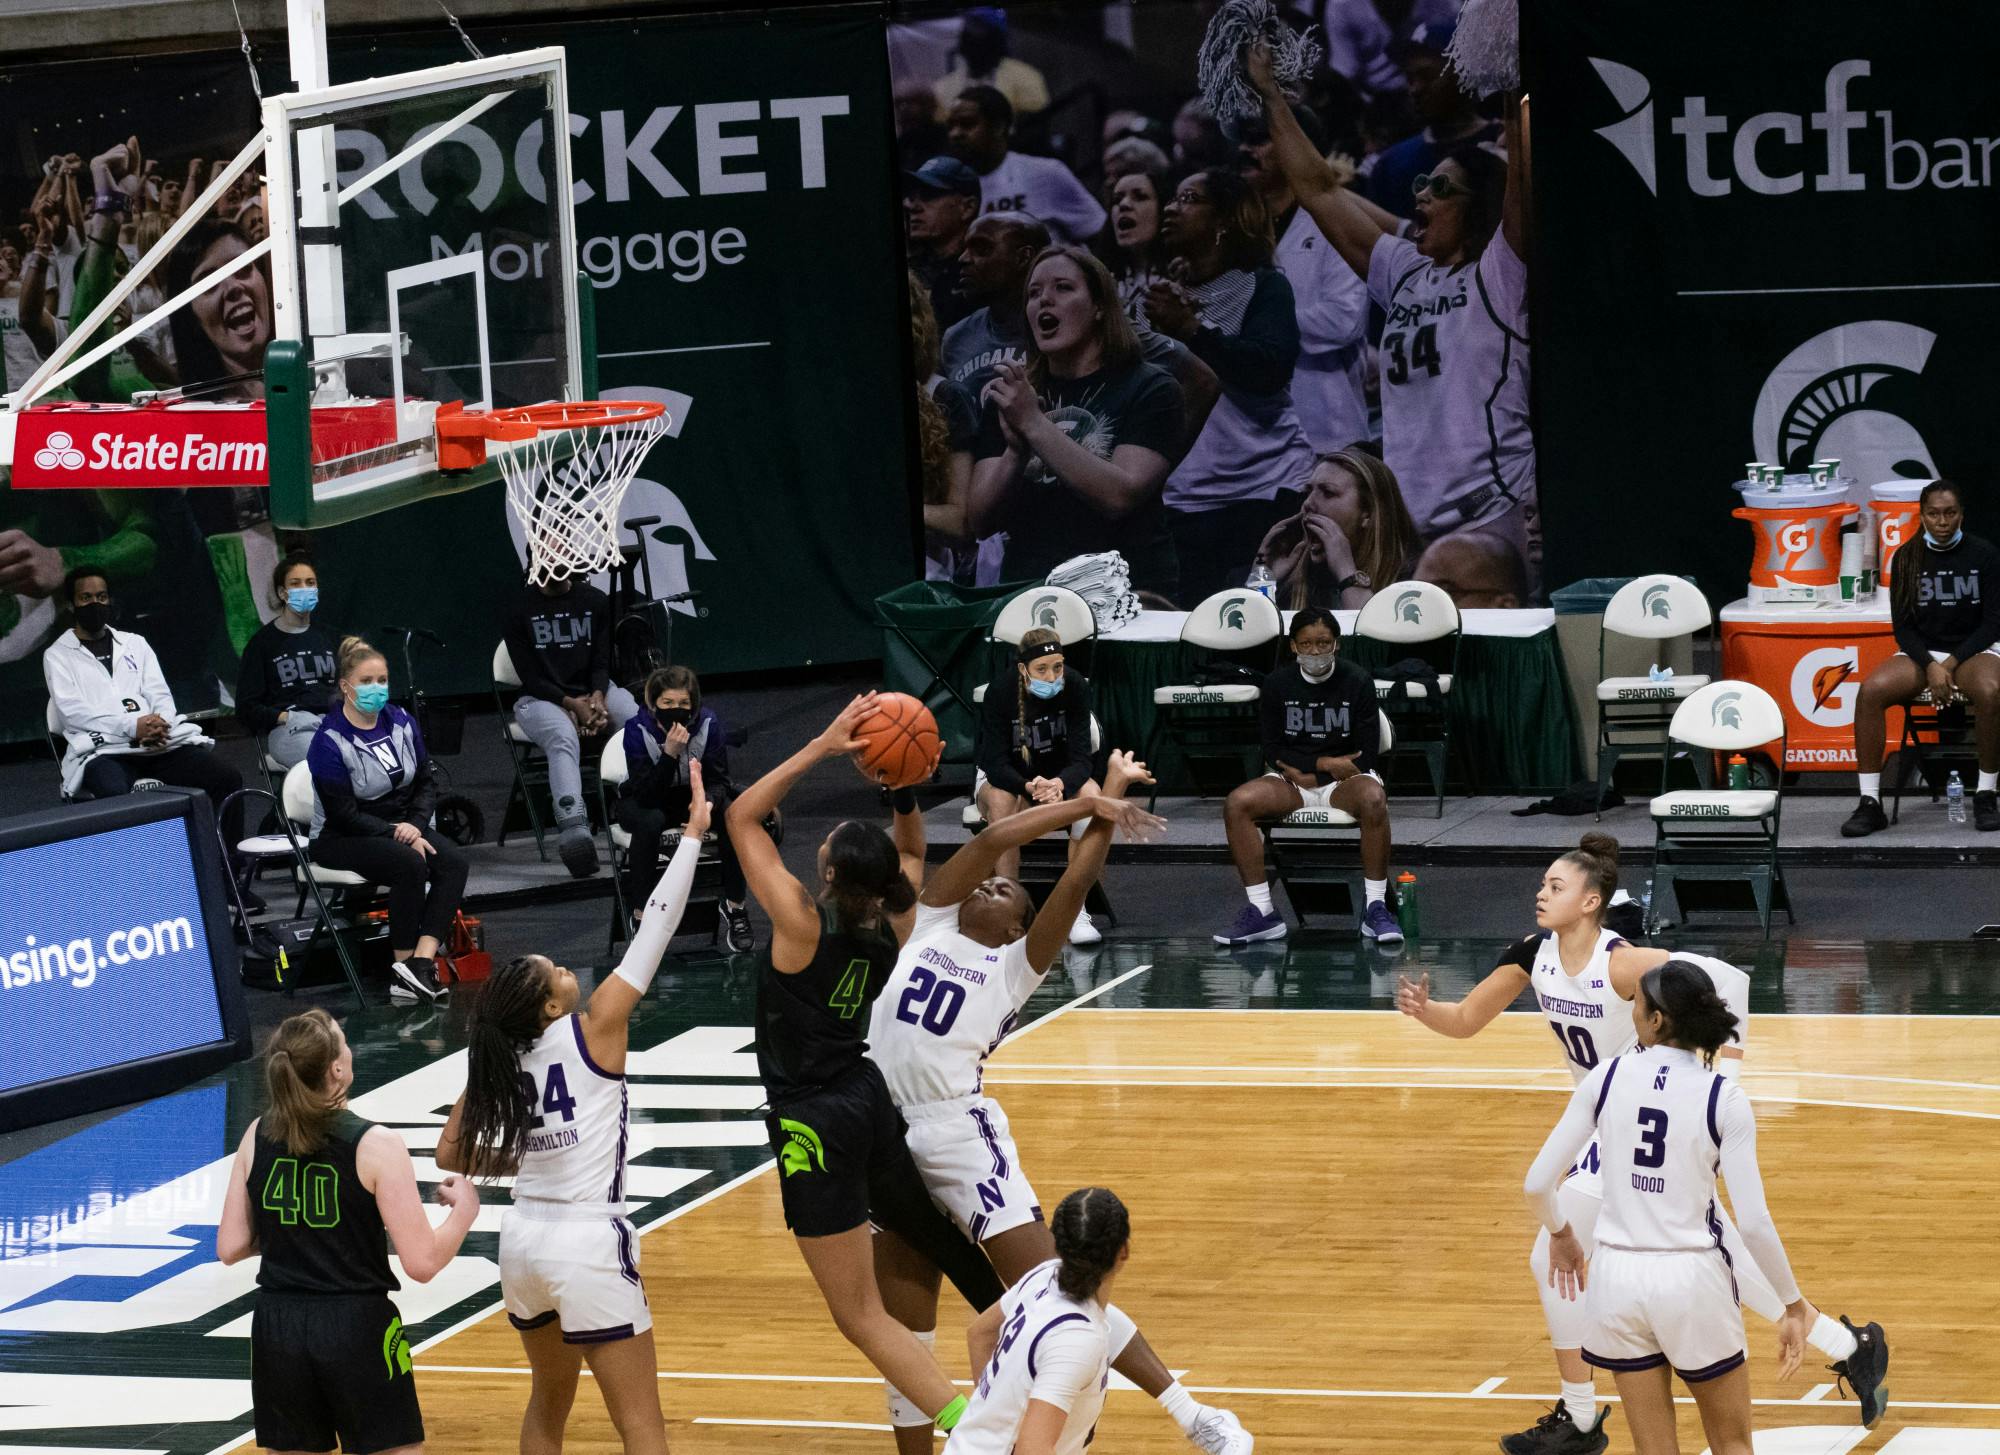 Junior Alisia Smith (4) attempts to score in the Spartans' loss against Northwestern University on Feb. 7, 2021.